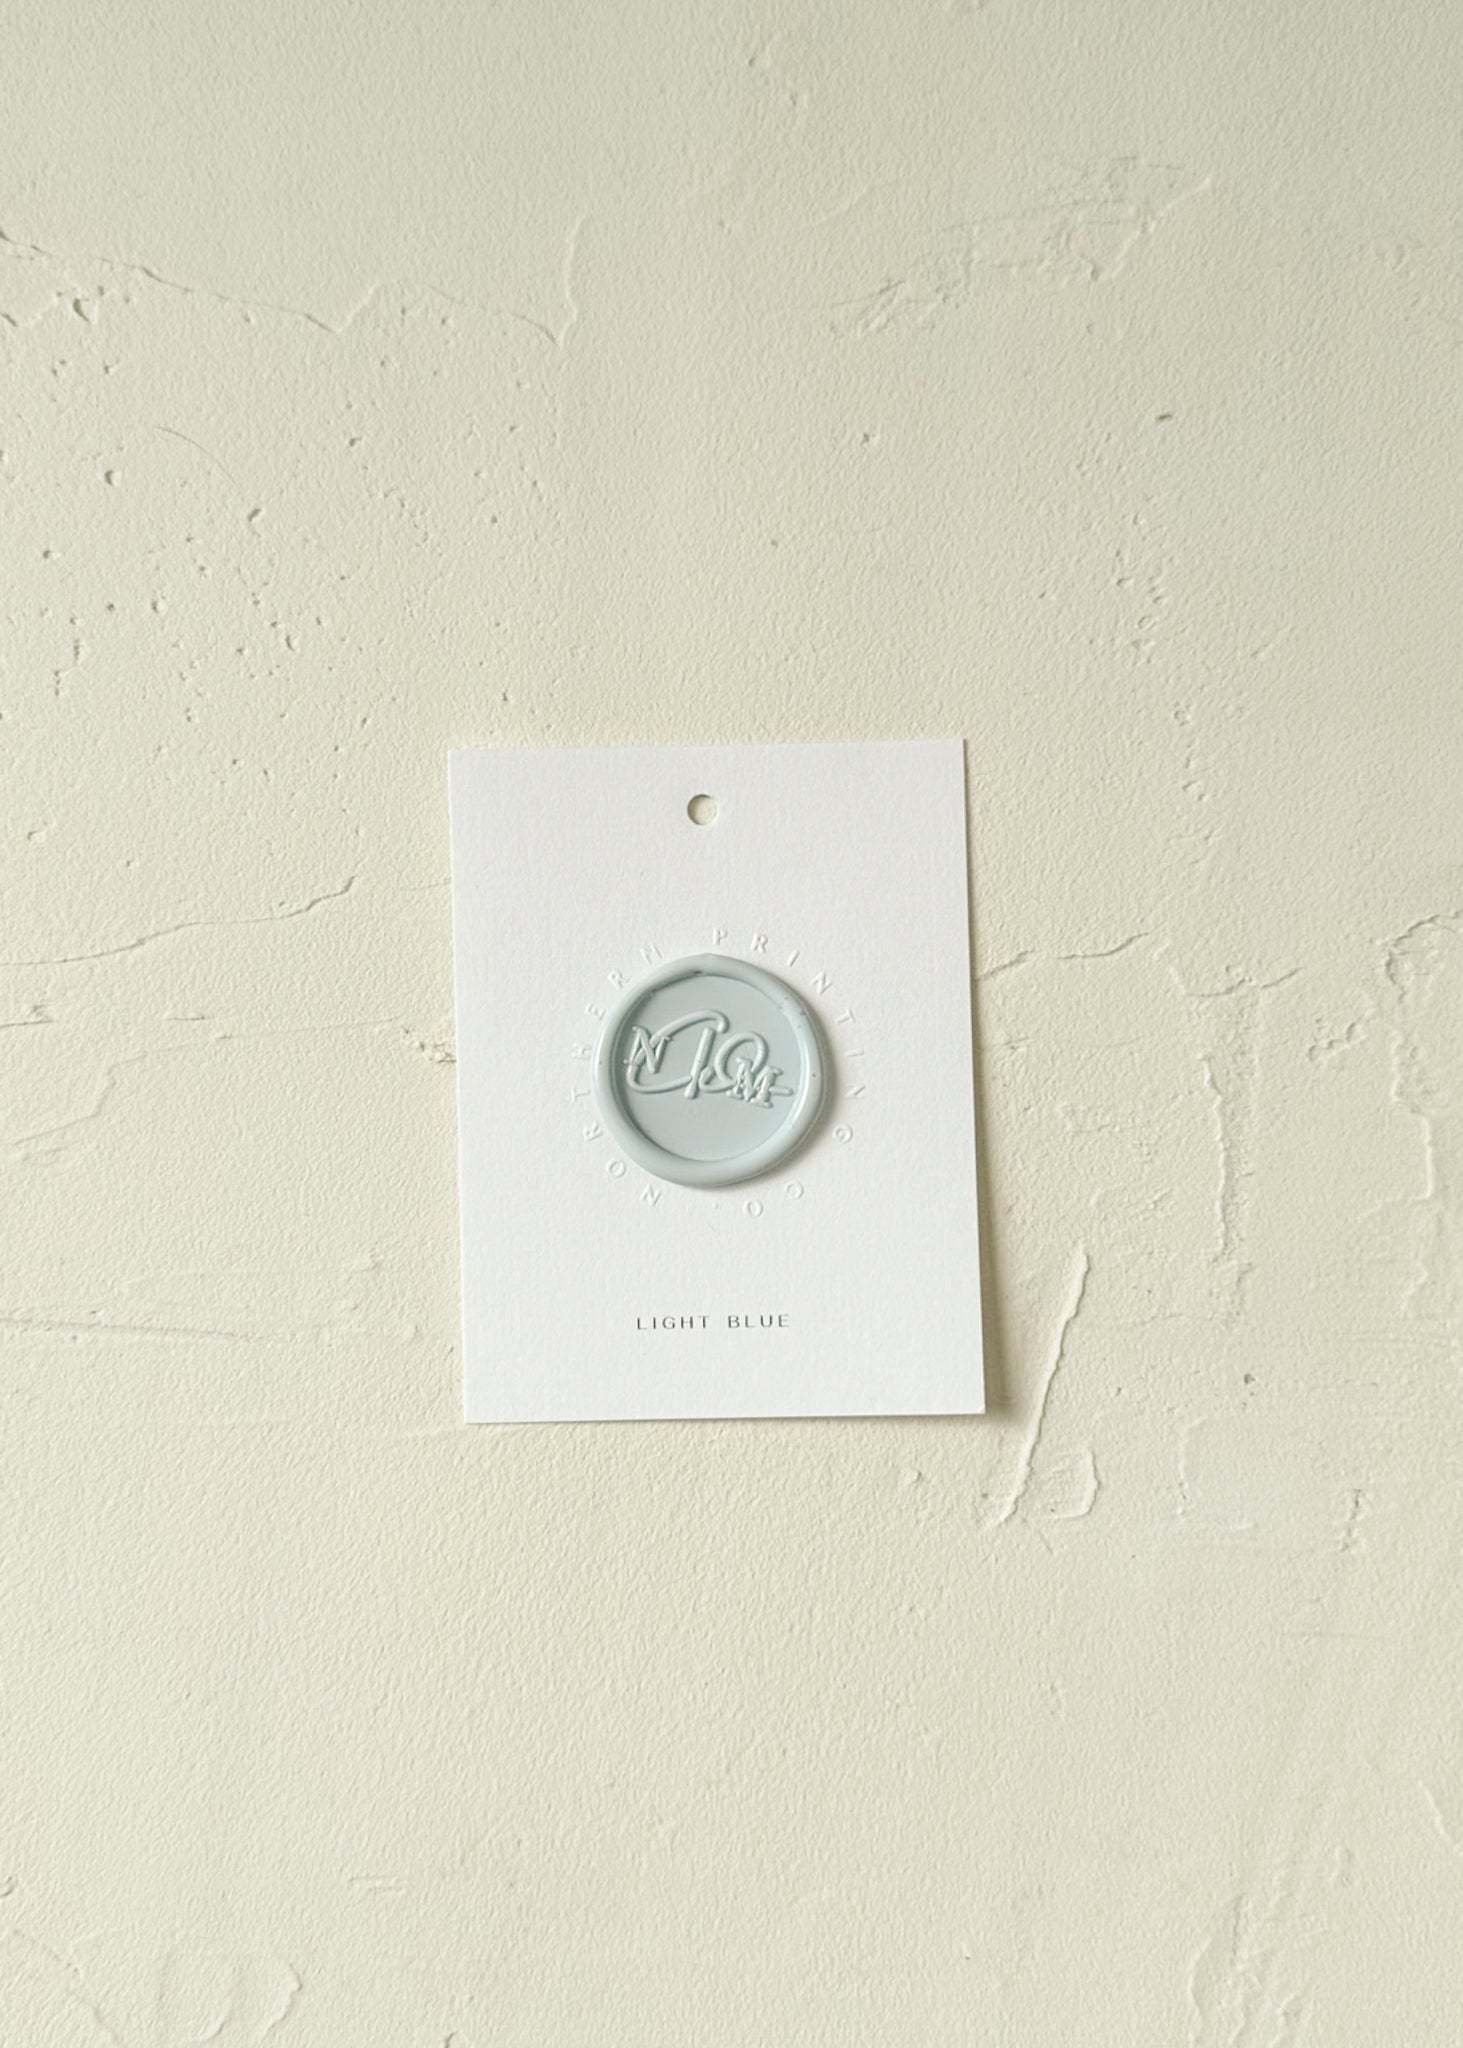 Elevated view of Light Blue wax seal stamp sample on textured background